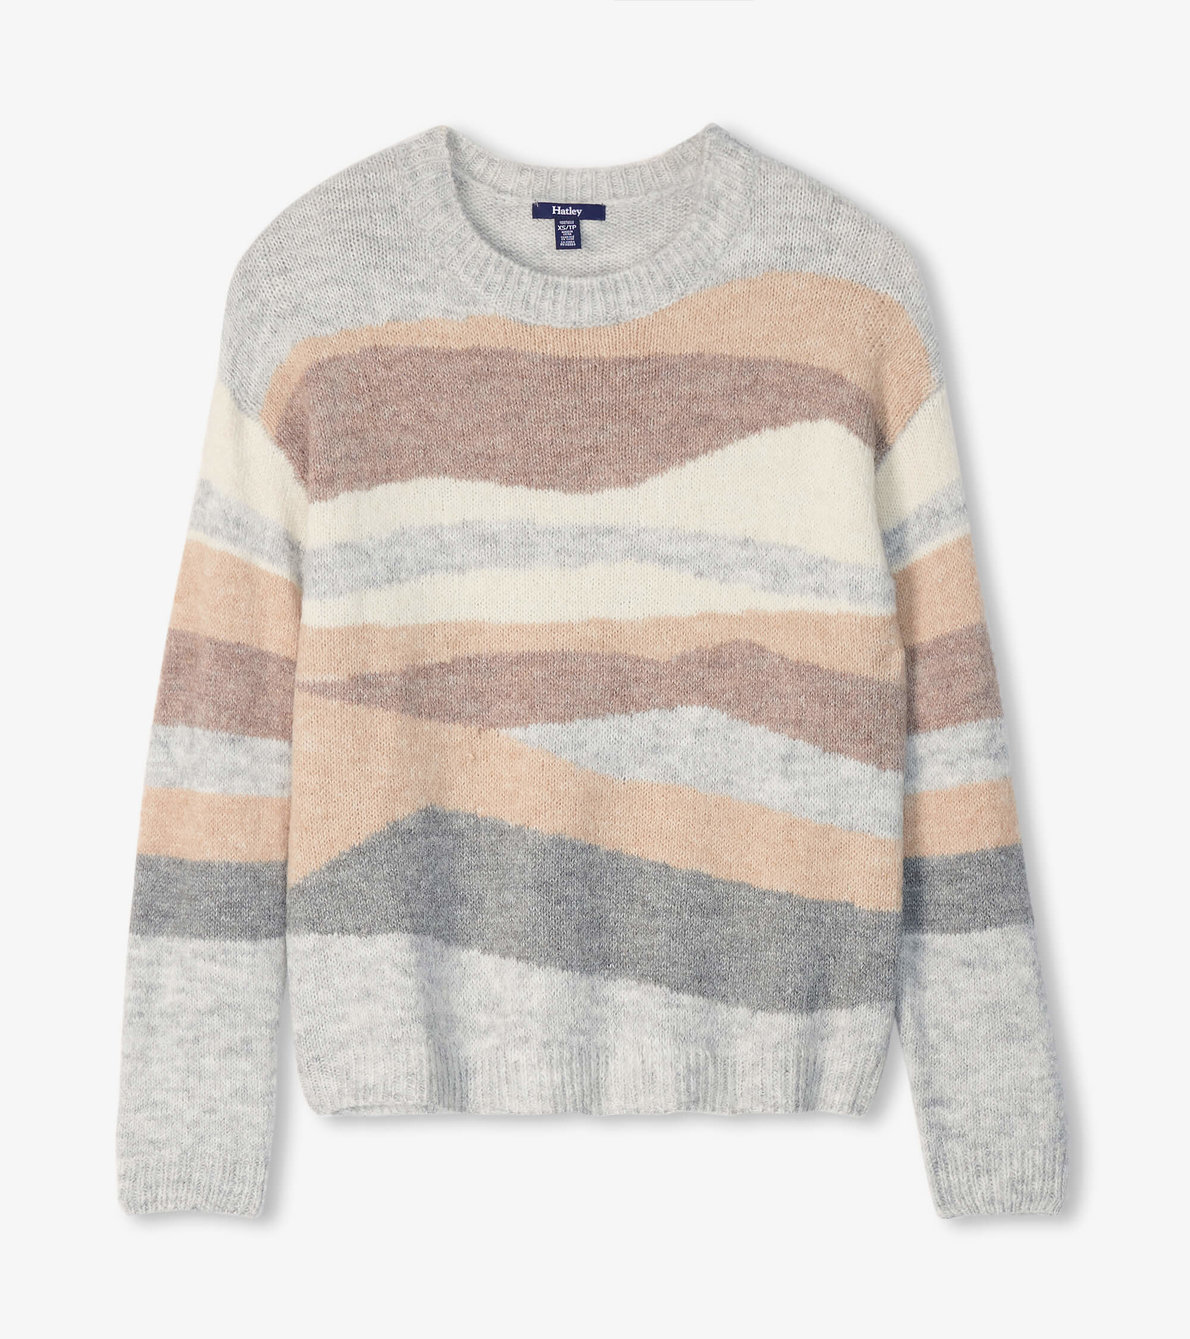 View larger image of Crew Neck Pullover - Mountain Stripes